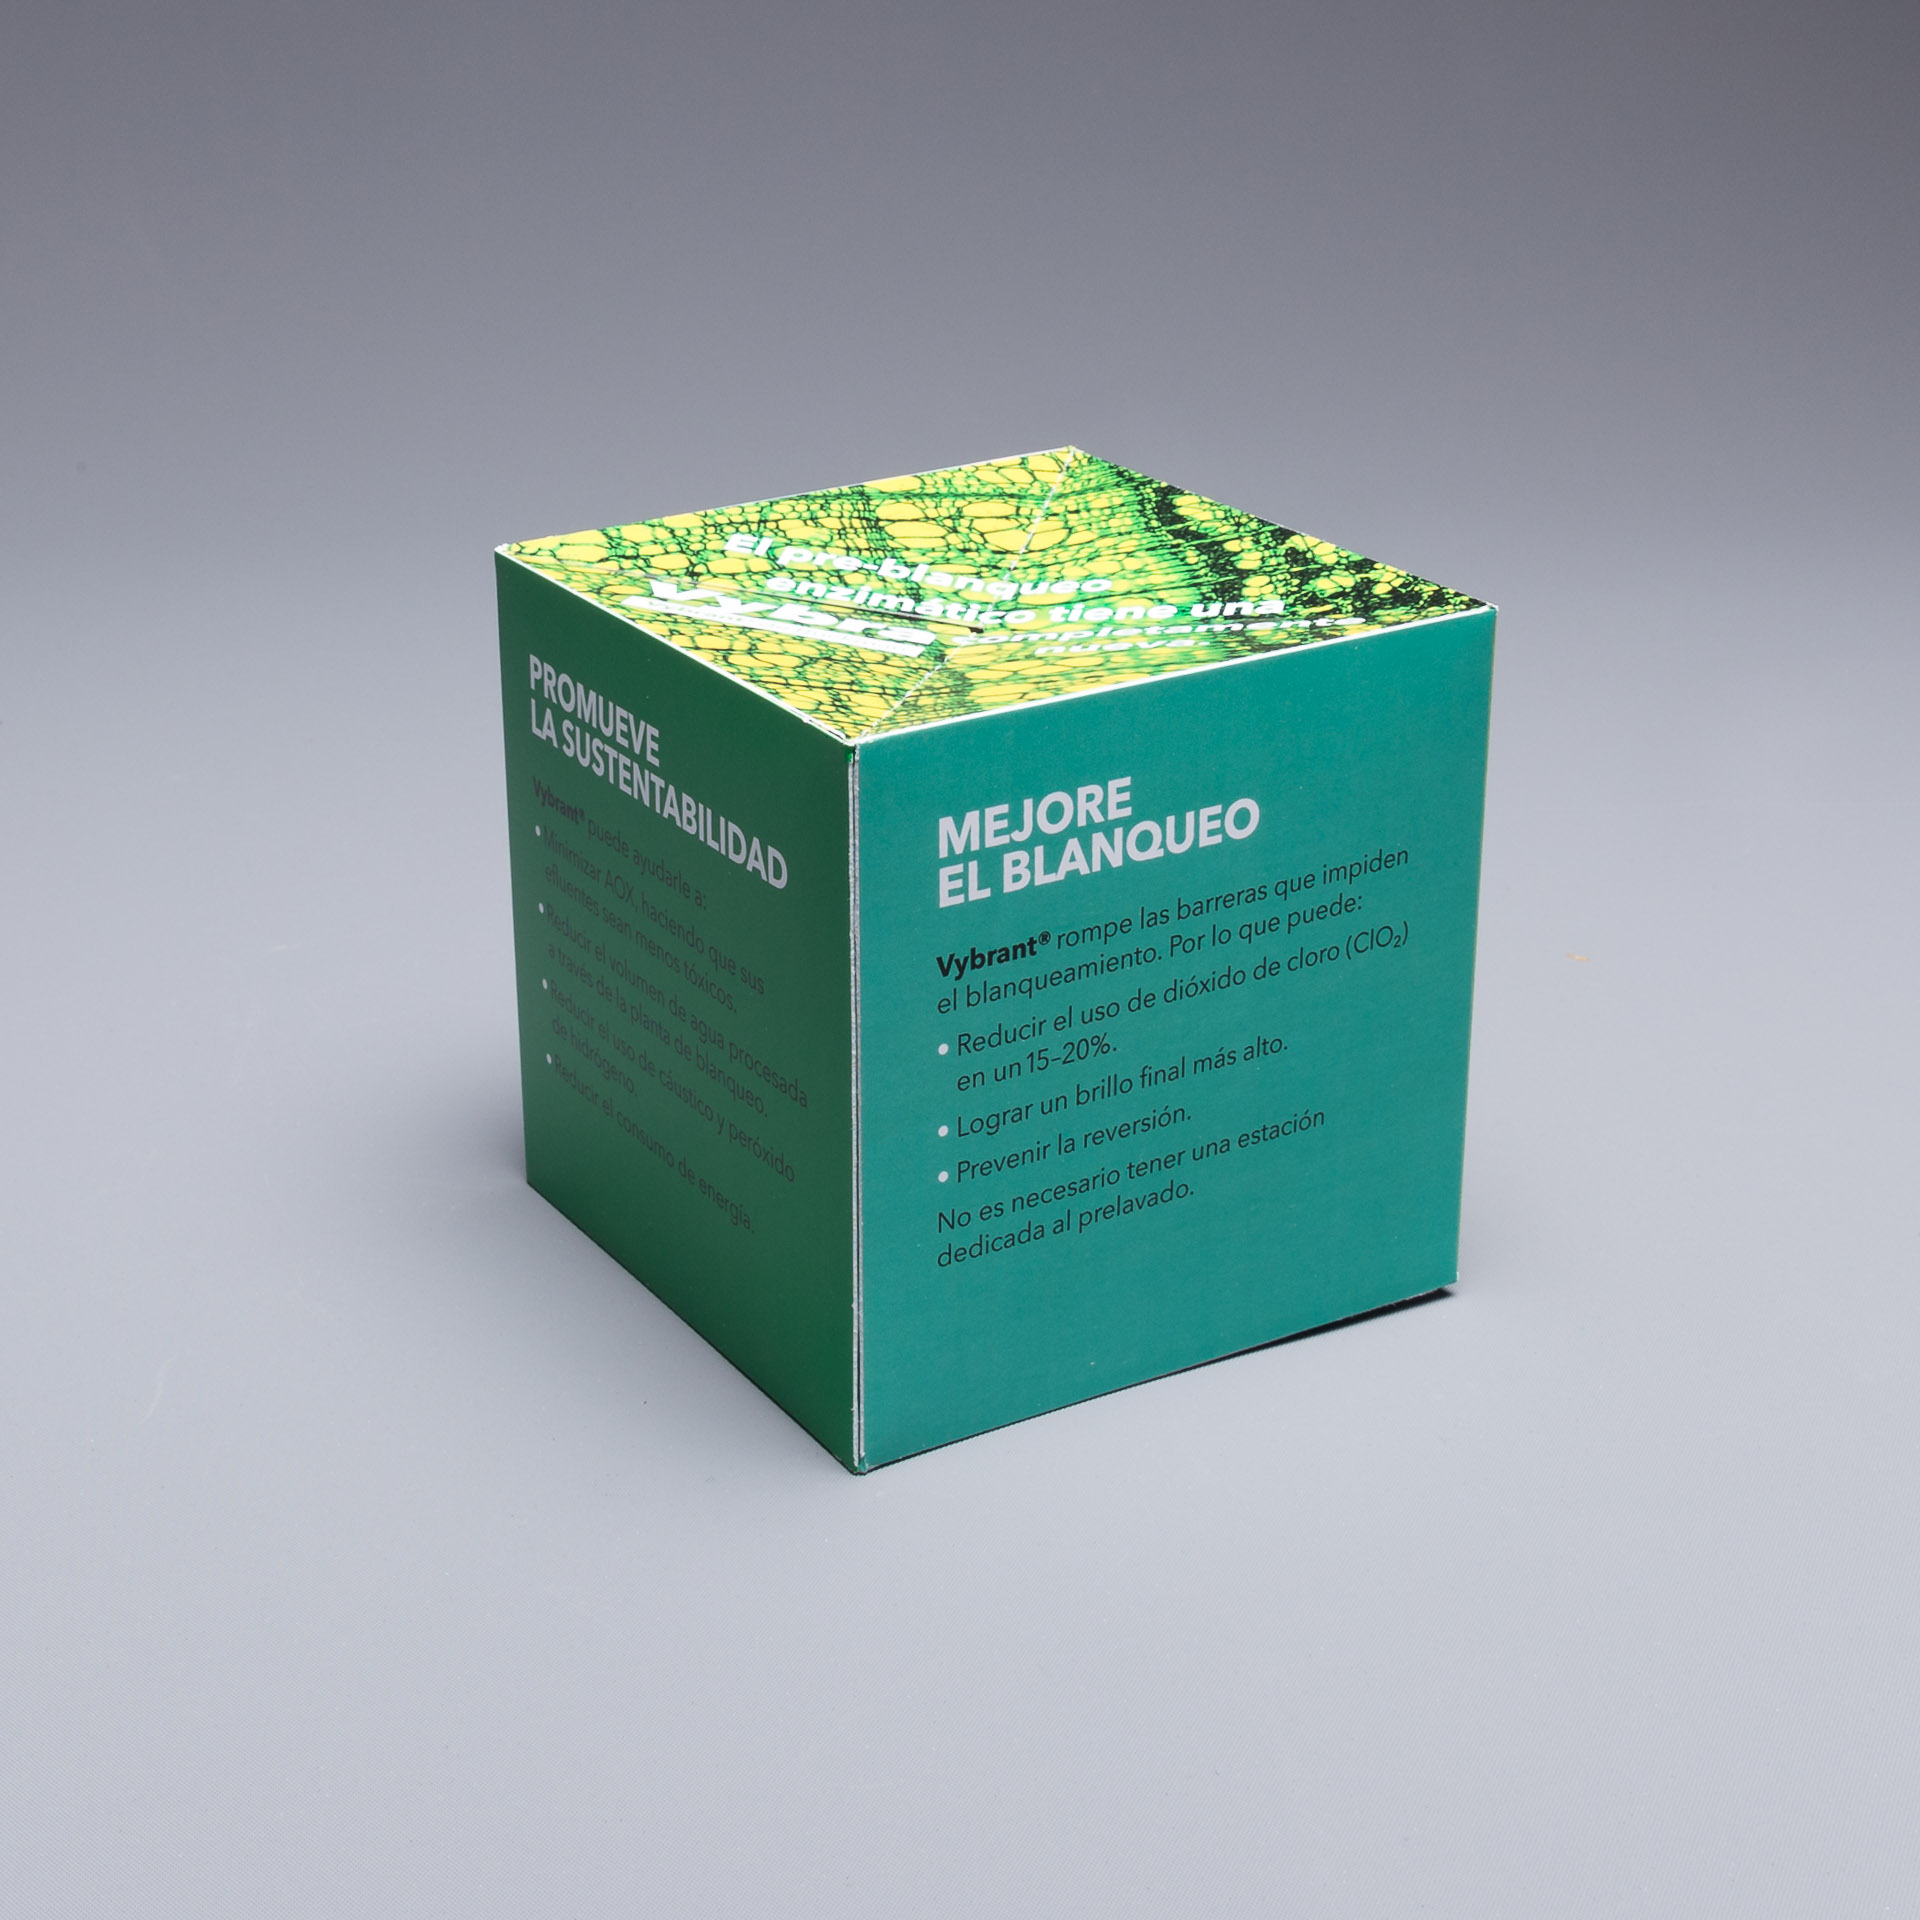 Buckman International uses 4.25" Pop Up Cube for Latest Promotional Offering